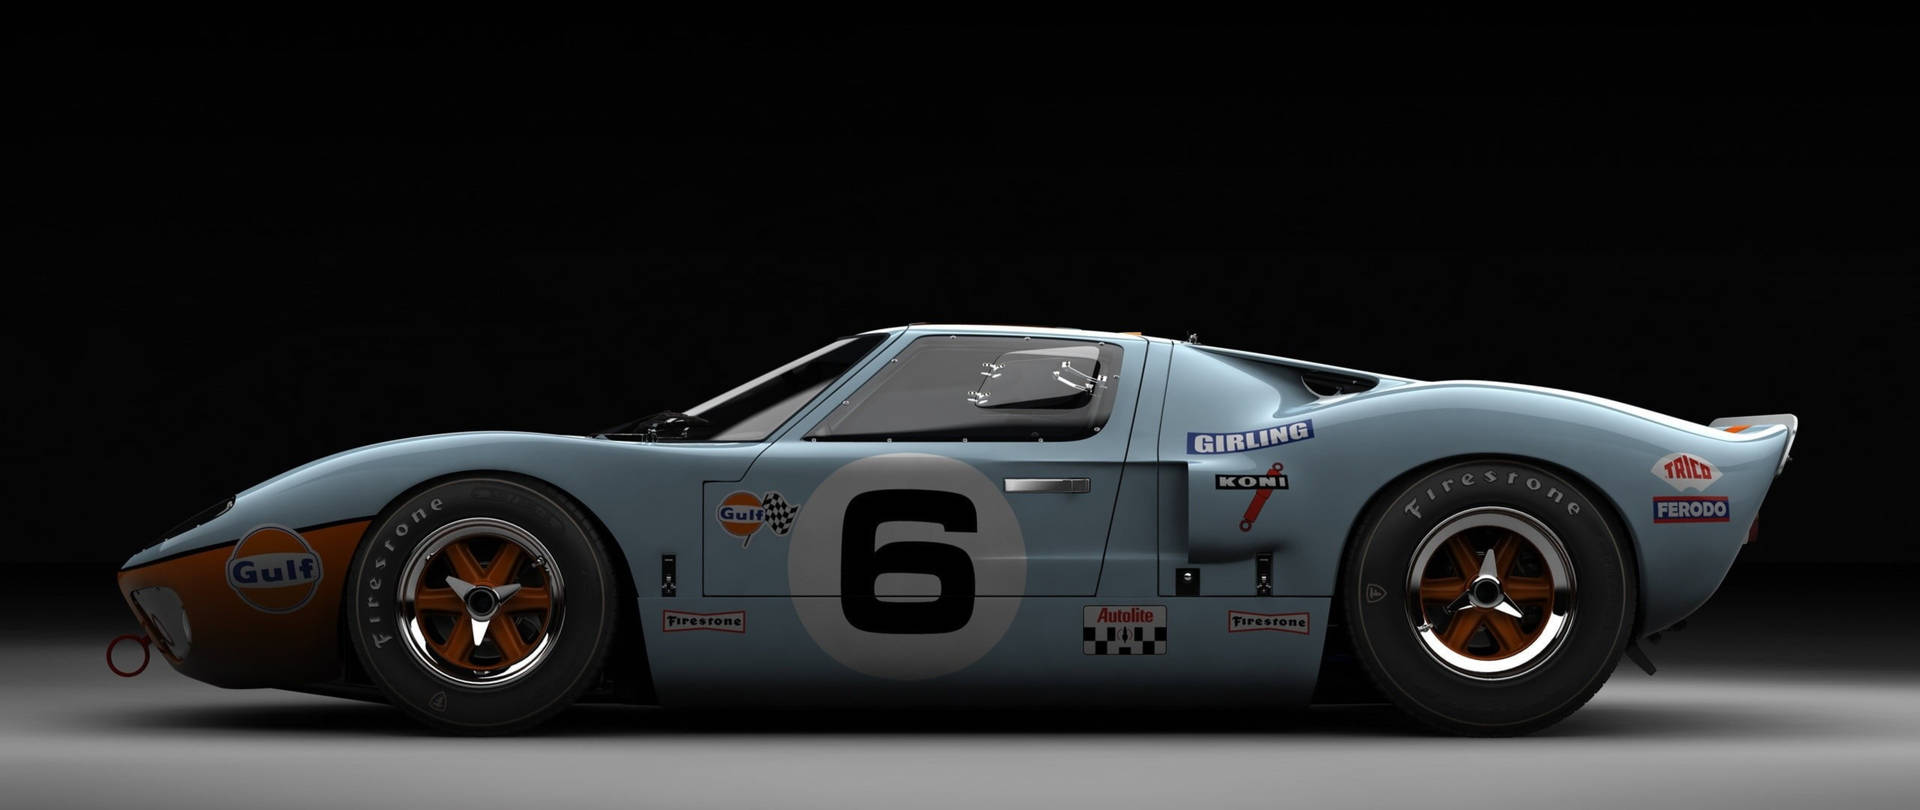 Sports Car Ford GT40 Side View Wallpaper